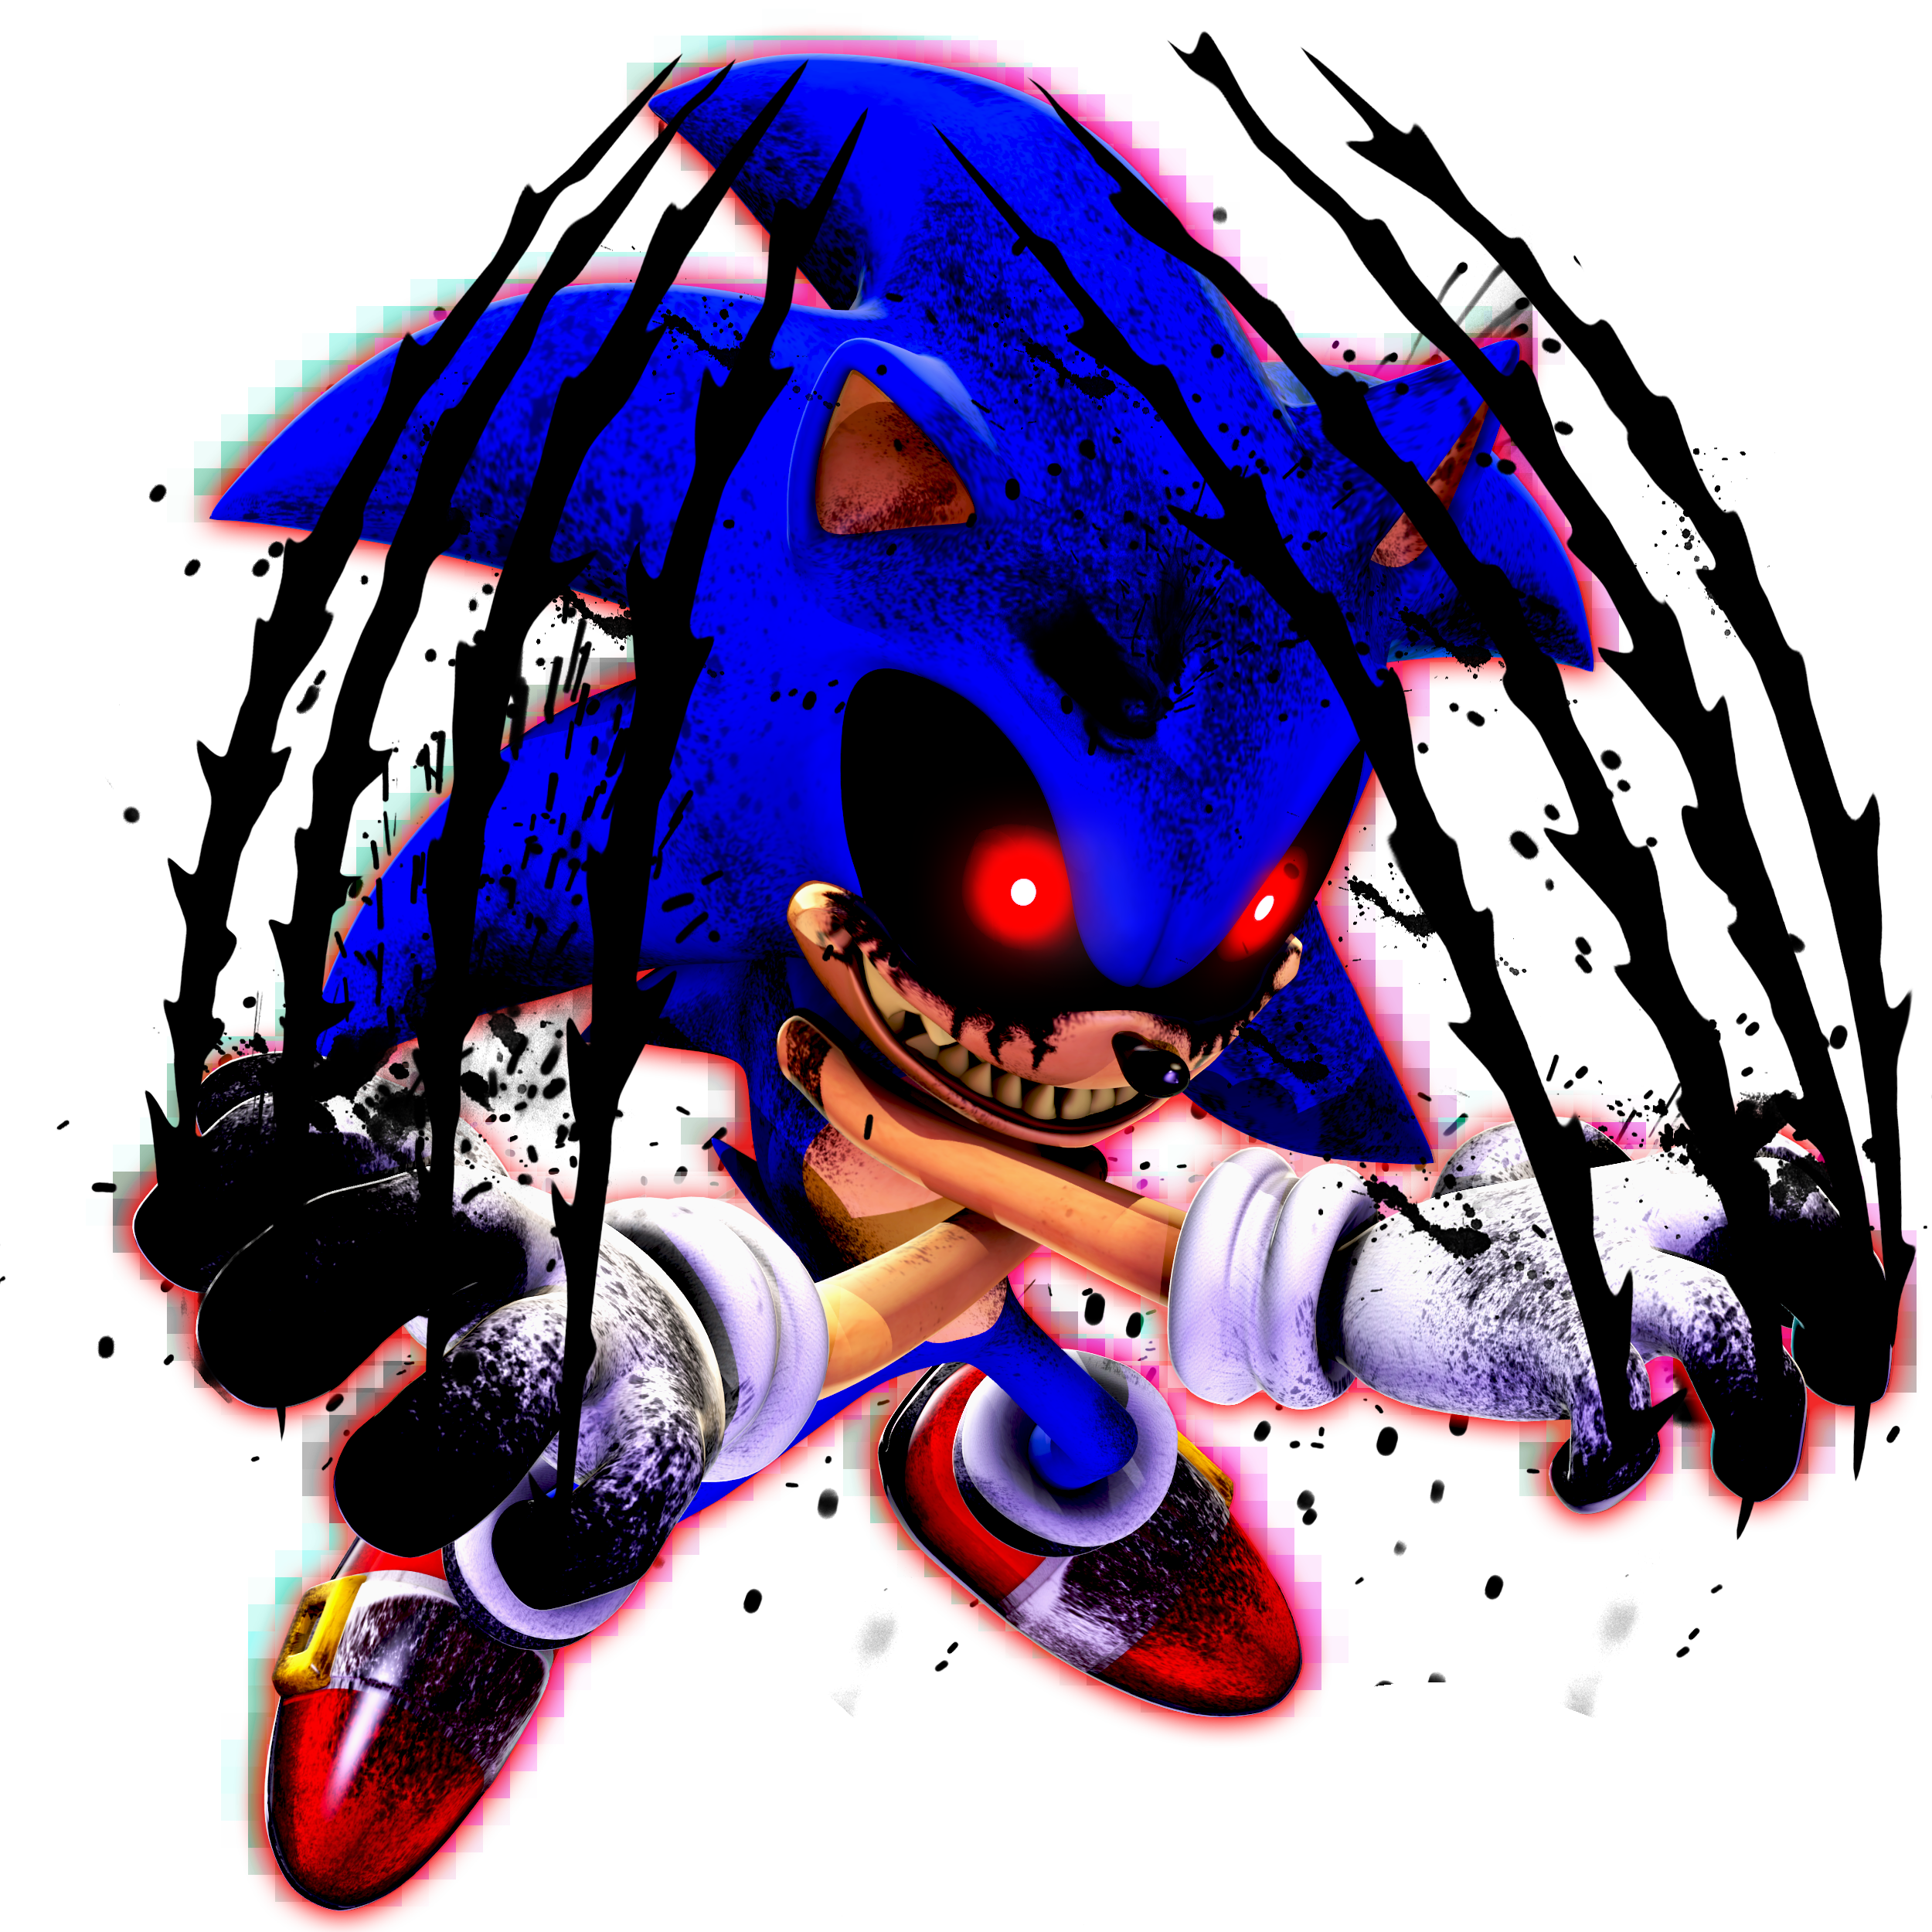 Metal Sonic.exe by OfficalSpringfox on DeviantArt